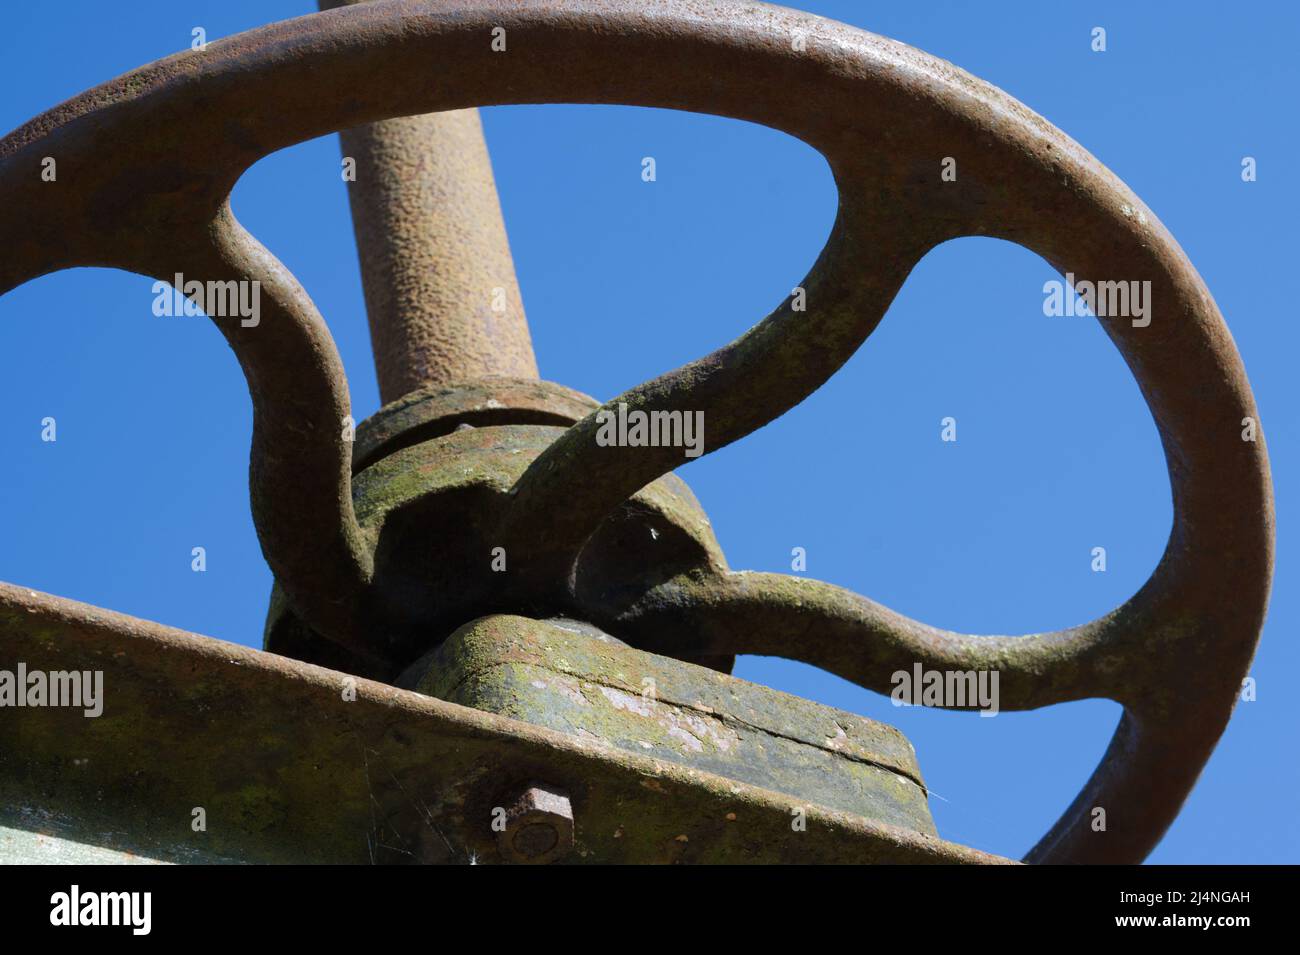 Closeup of old, pitted iron wheel Stock Photo